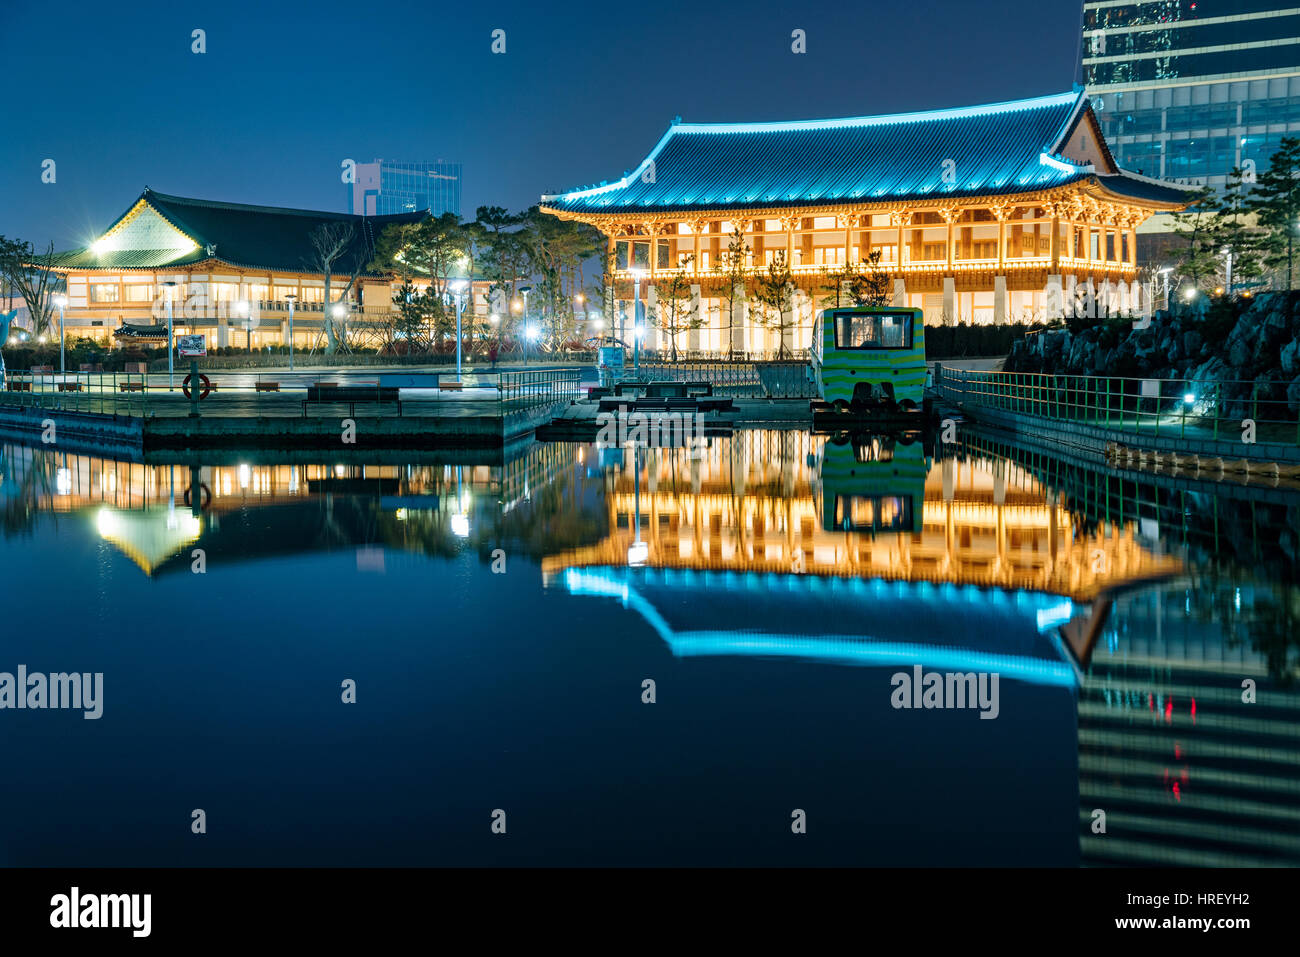 INCHEON, SOUTH KOREA - FEBURARY 10: Architecture in Incheon Central Park at night time which is the center of the city's financial district and a famo Stock Photo